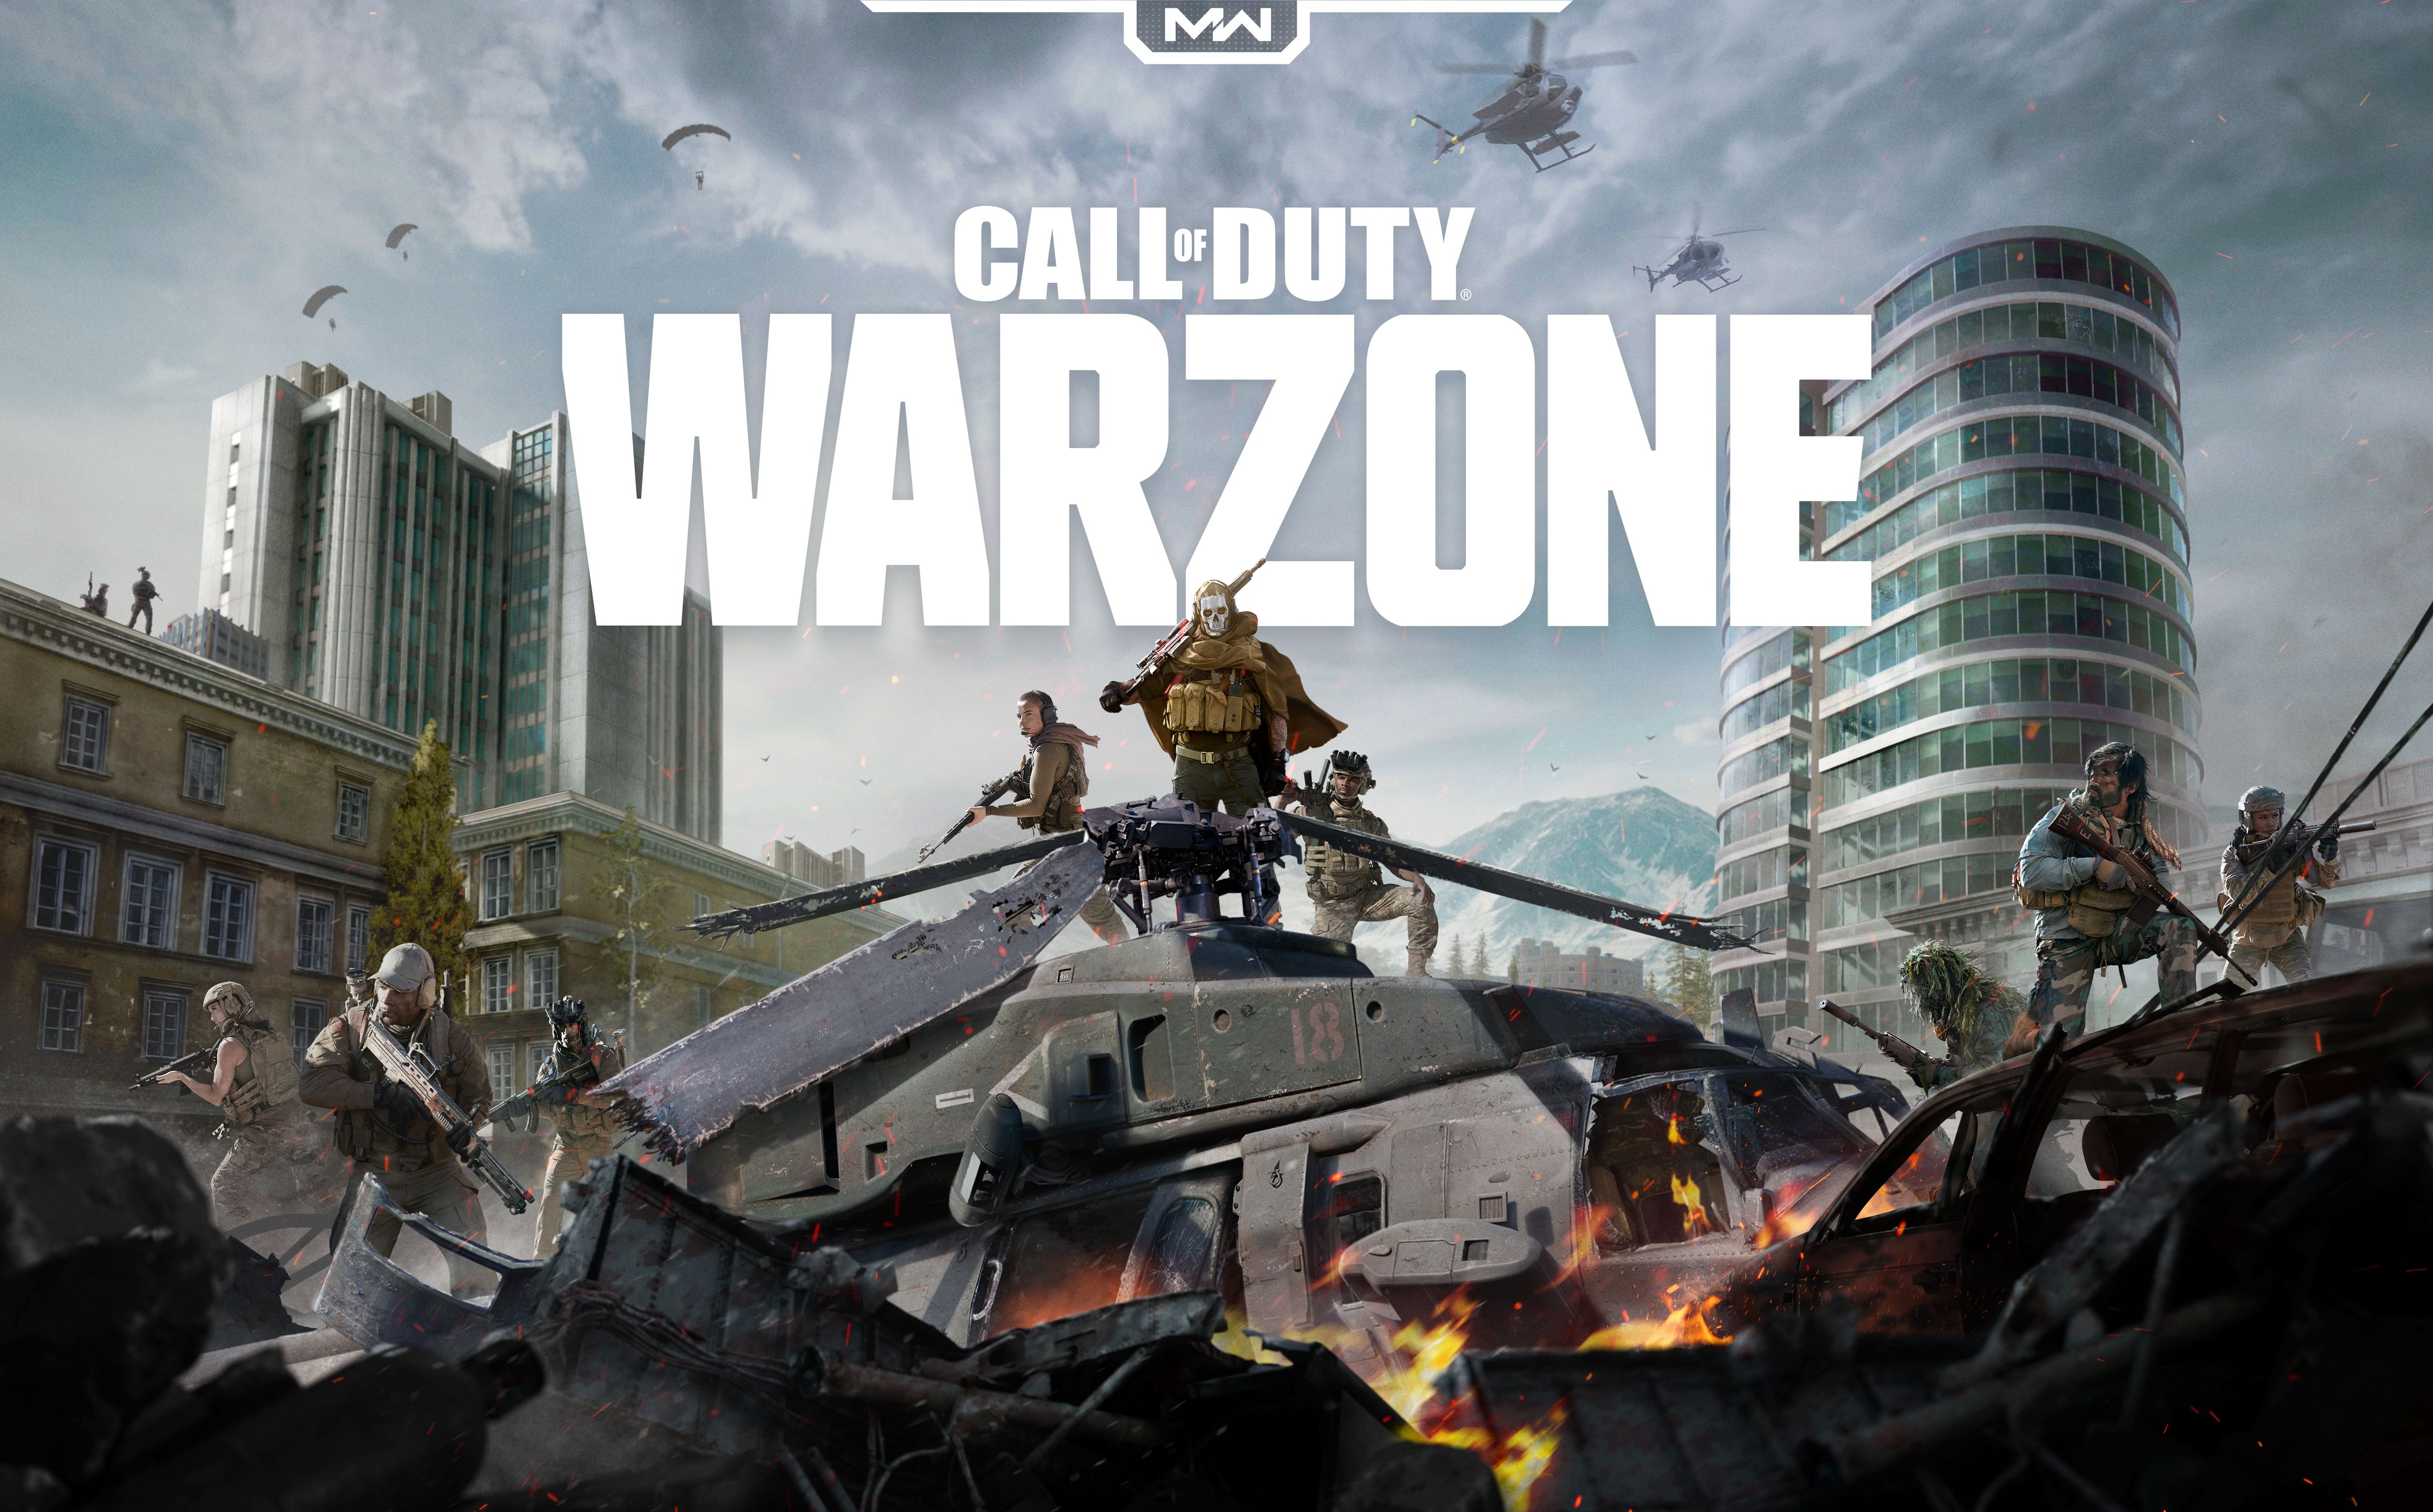 HD wallpaper, Playstation 4, Pc Games, Call Of Duty Warzone, Xbox One, 2020 Games